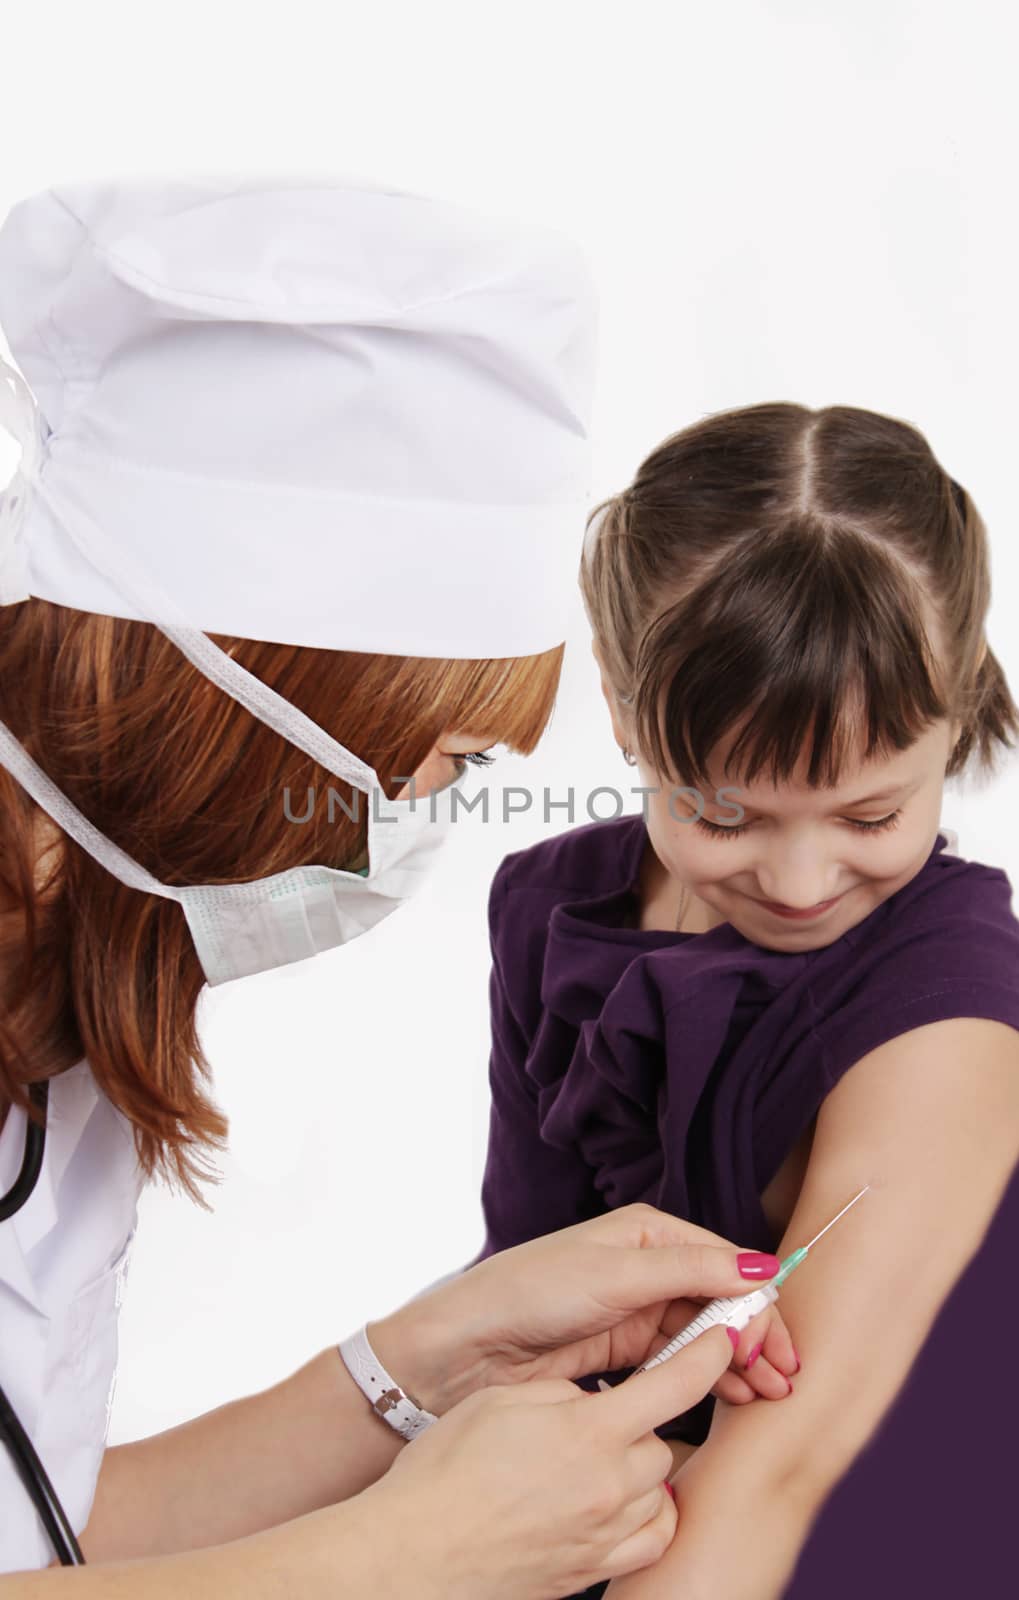 Woman doctor vaccinating girl in hand over white